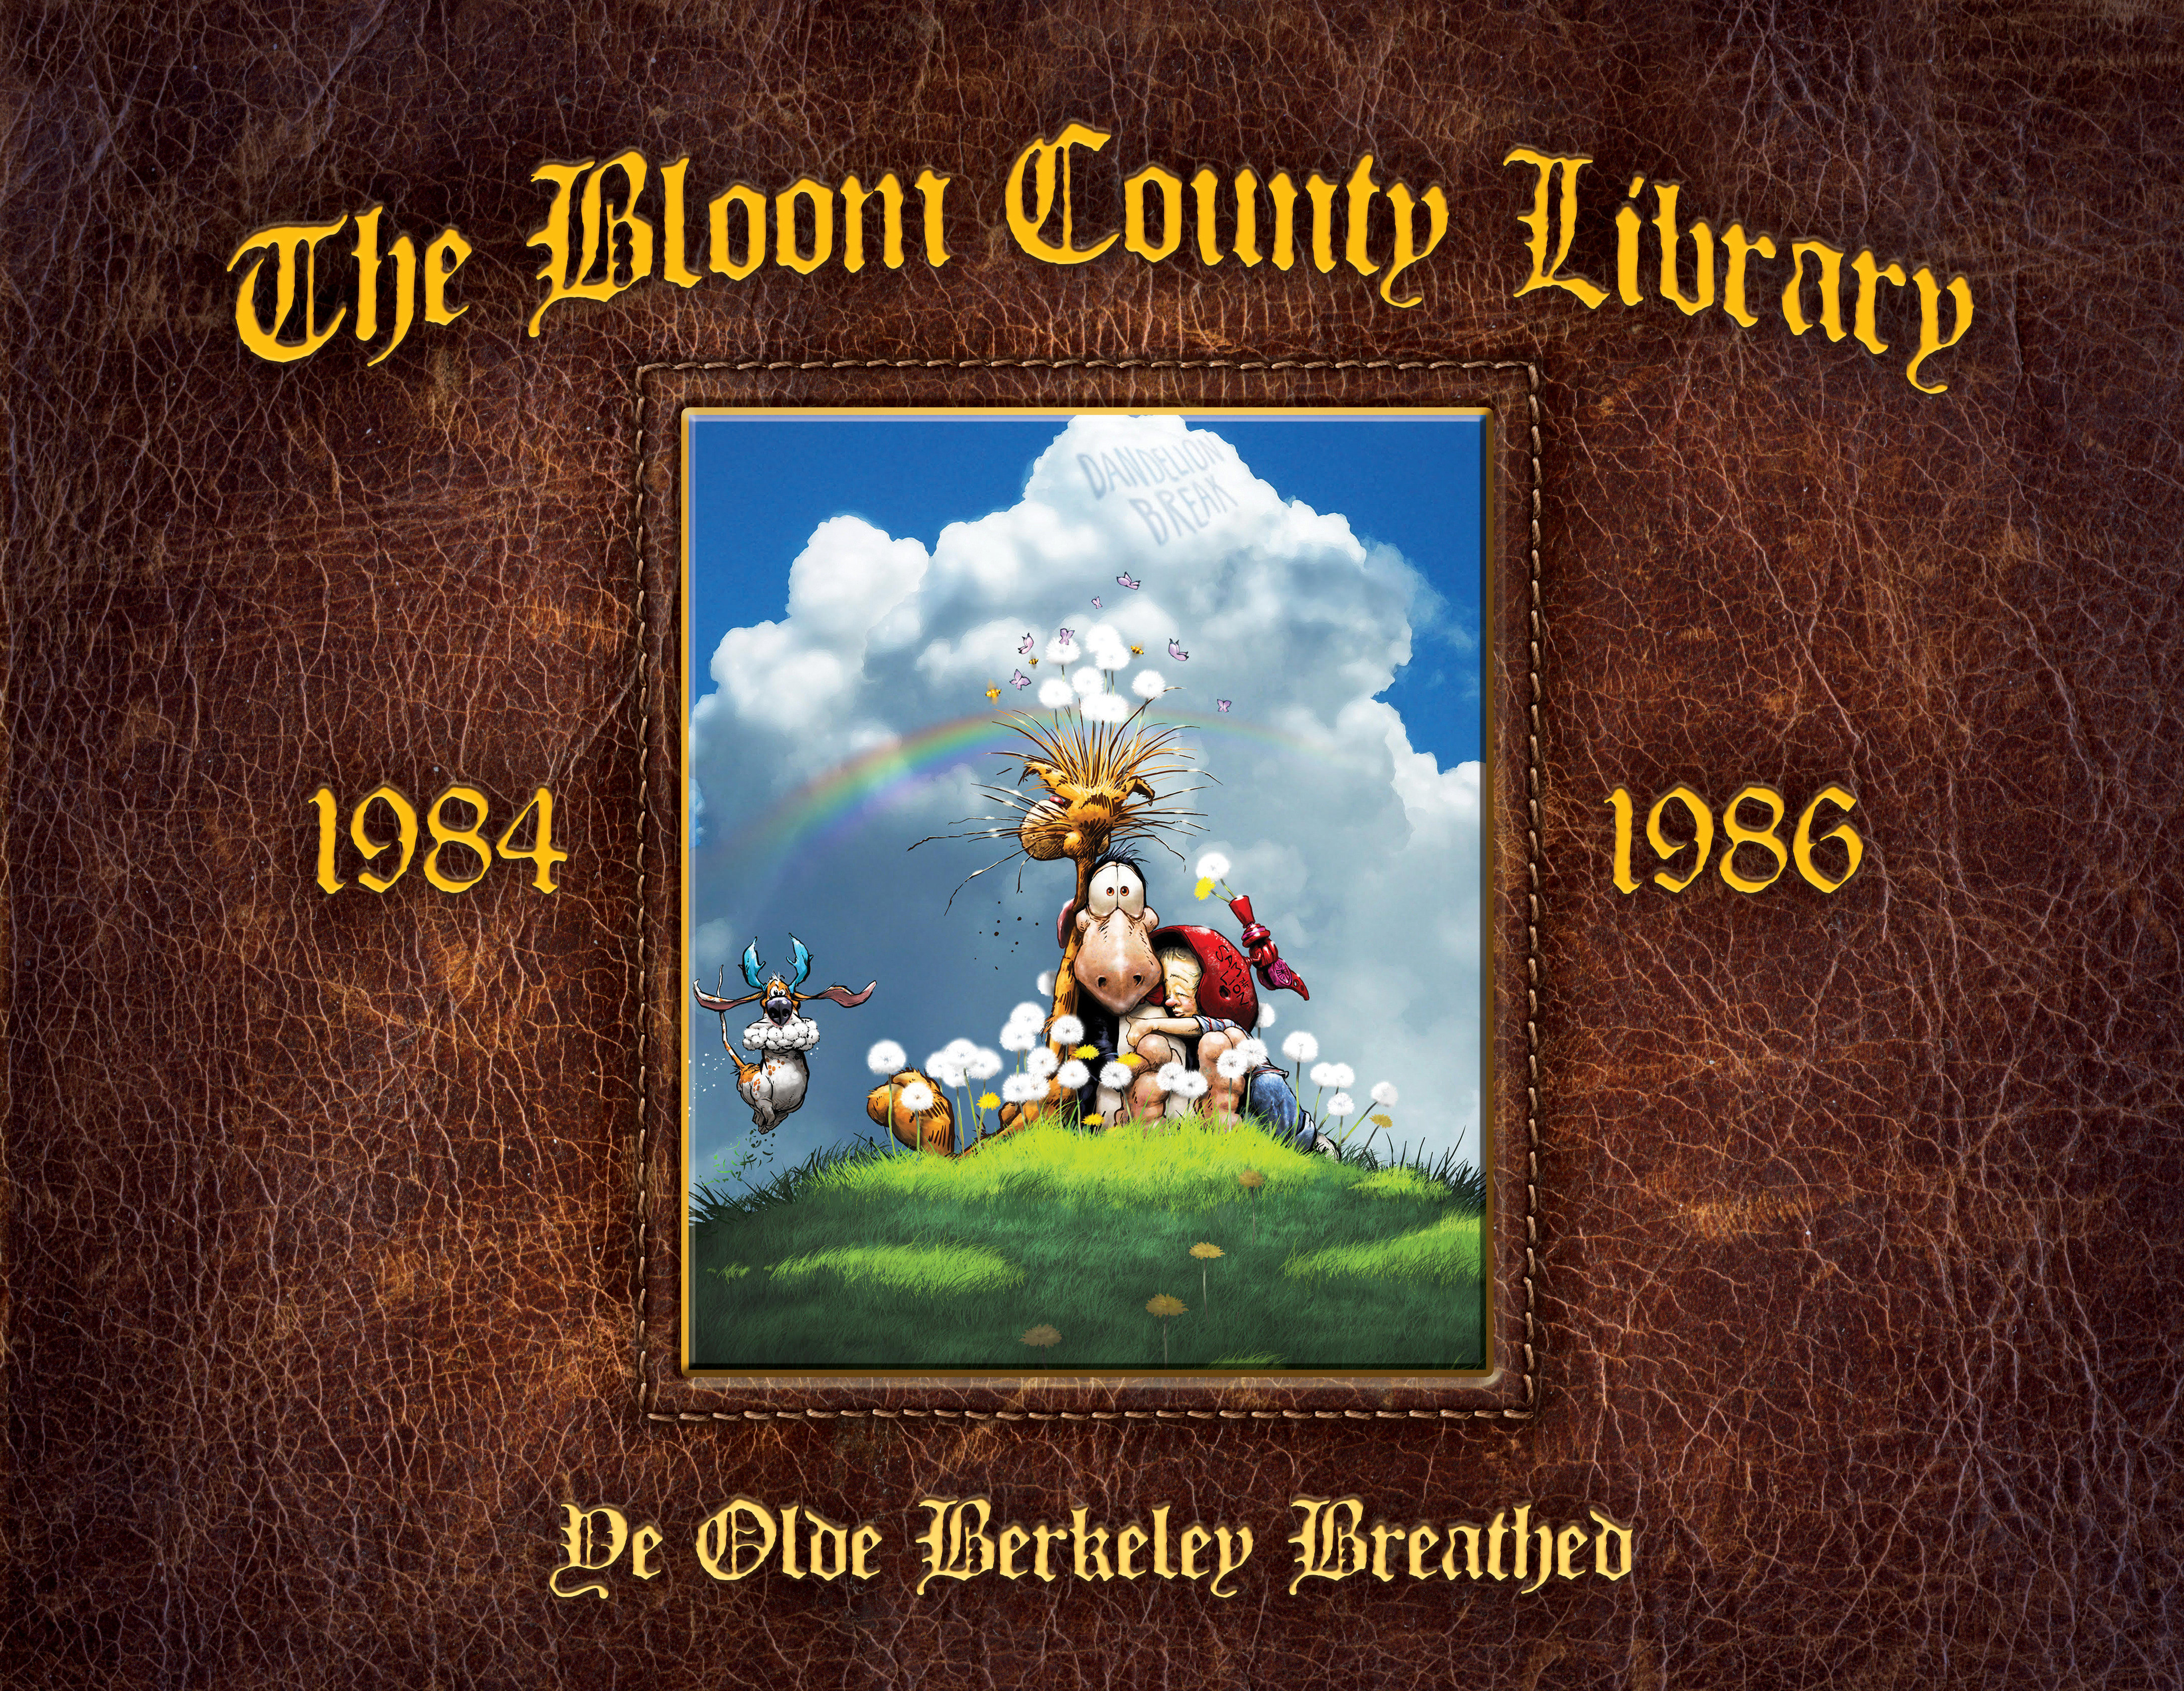 Bloom County Library Graphic Novel Volume 3